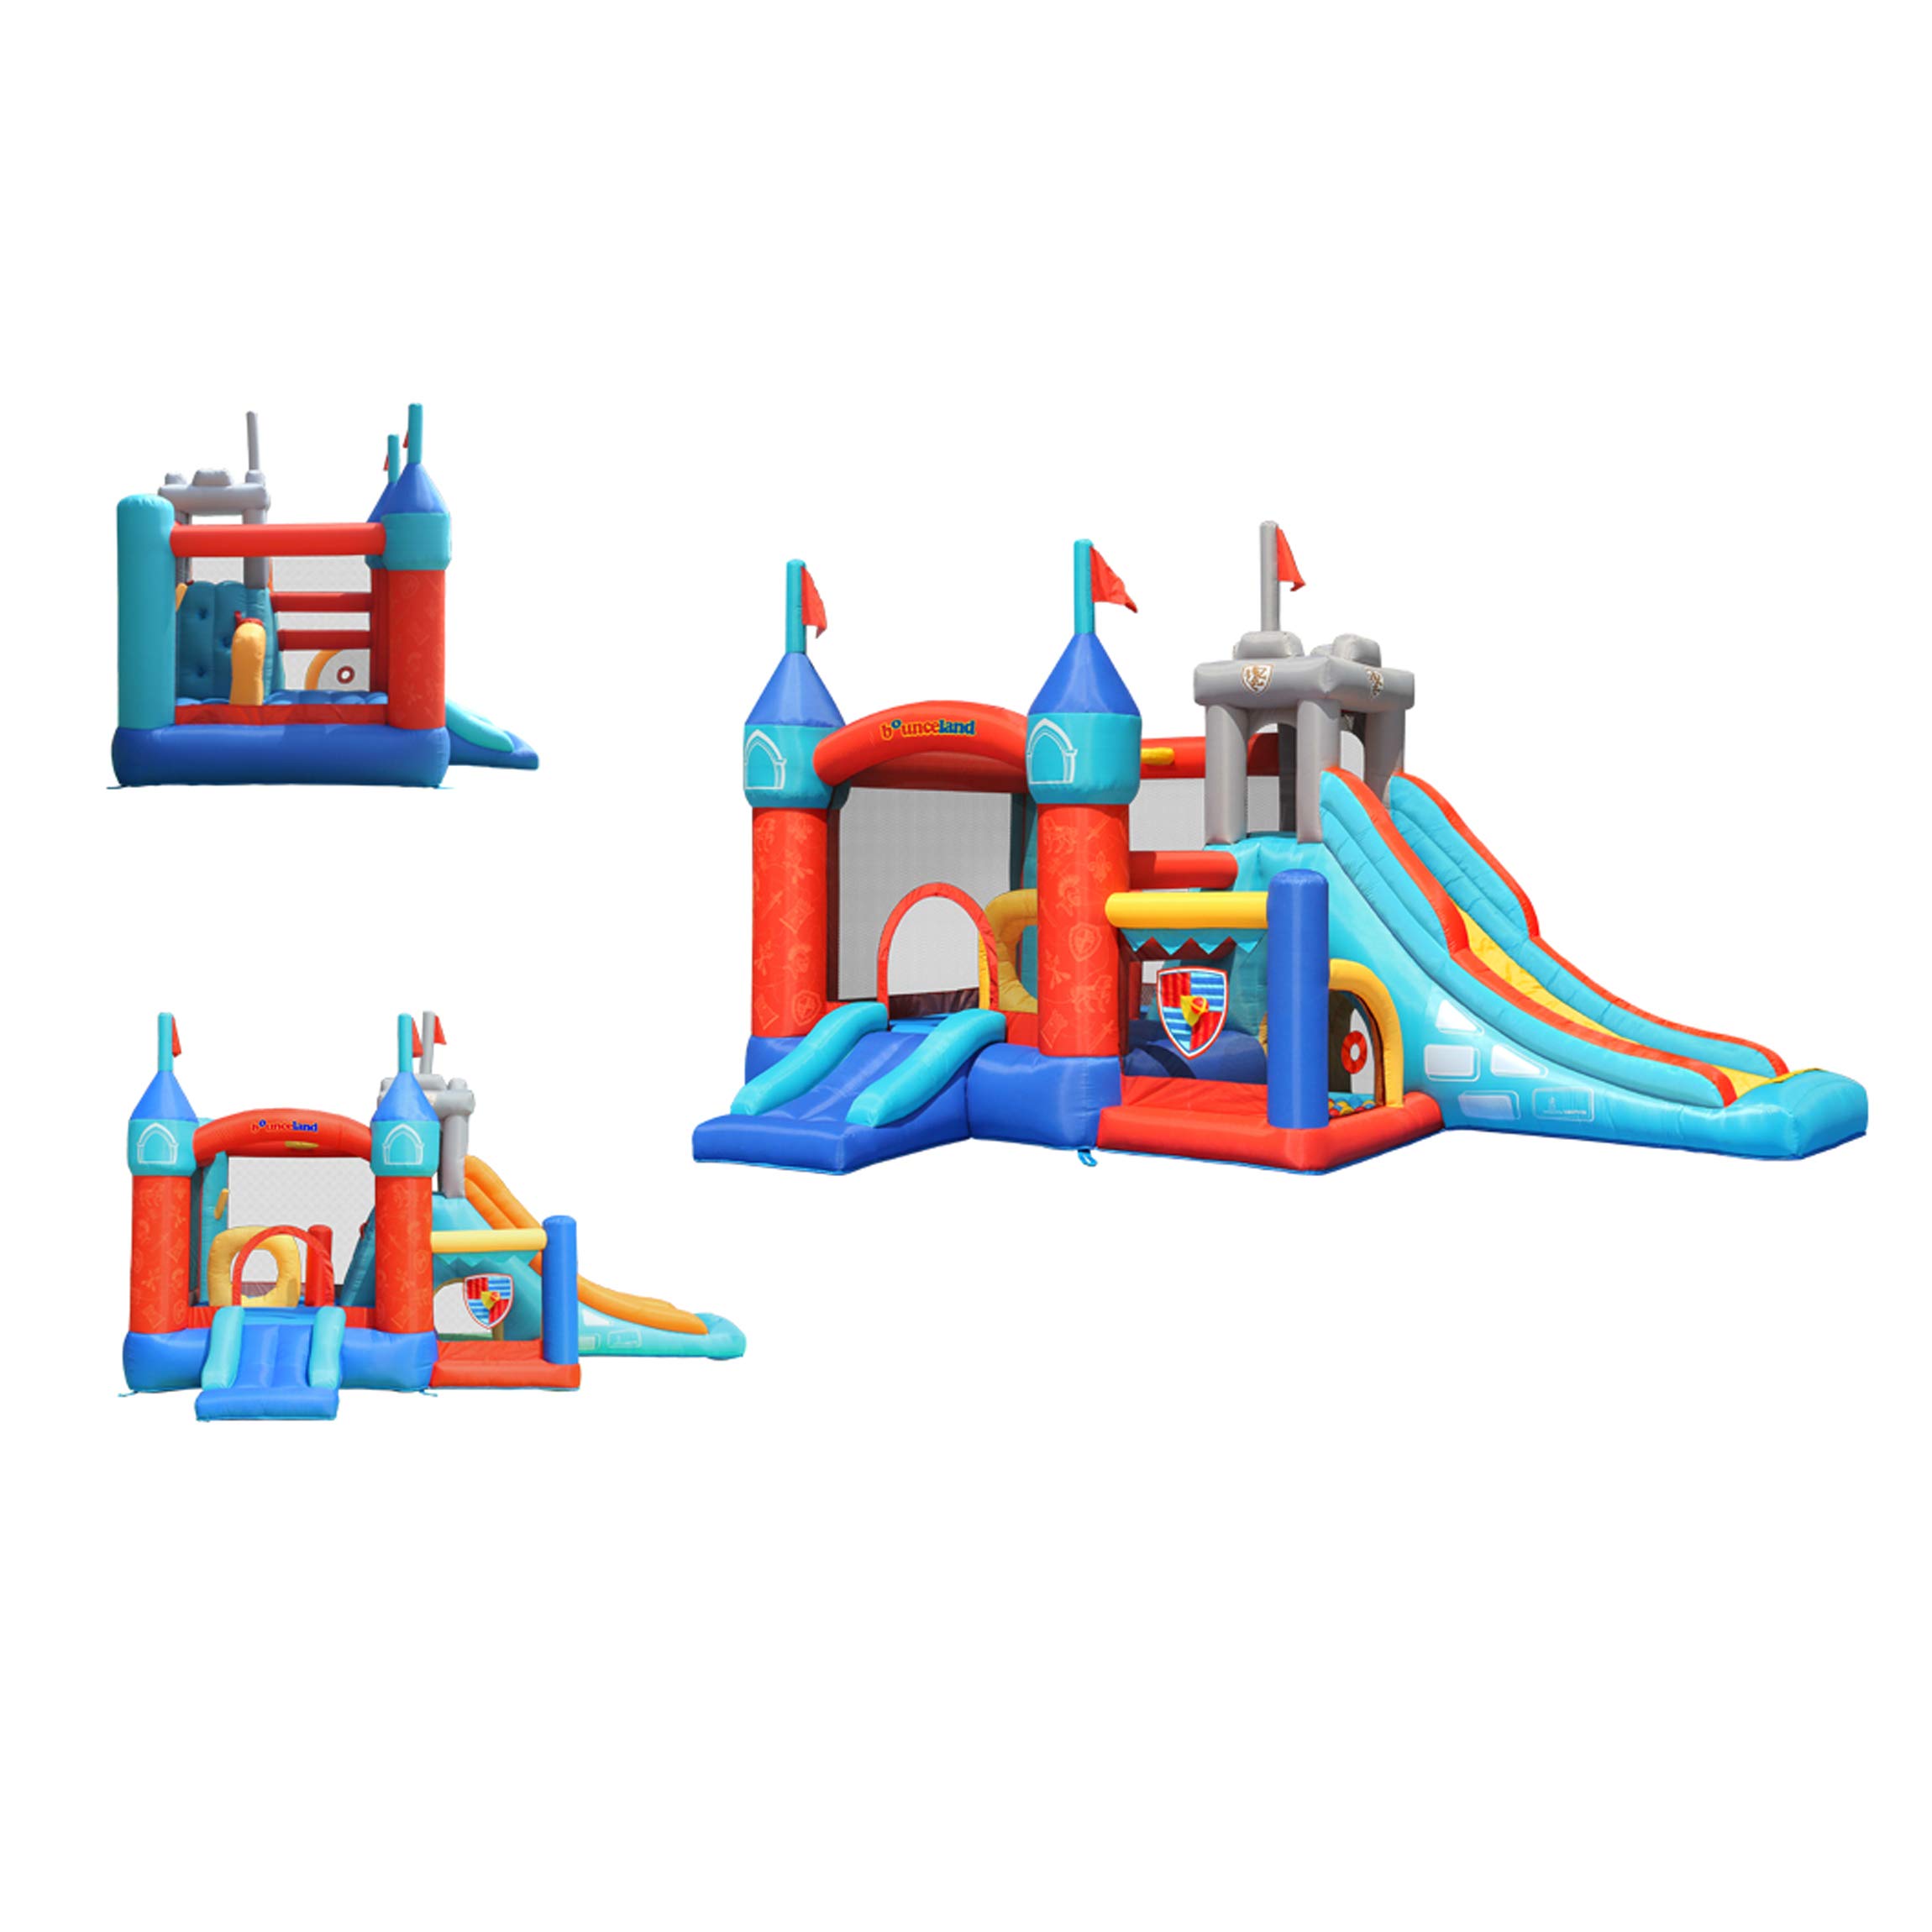 Bounceland Medieval Bounce Castle Bounce House with Slide & Ball Pit, Basketball Hoop and Ball Toss Game Included, Long Fun Slide, Obstacle Courts, Comes with UL Certified Blower Fun Party